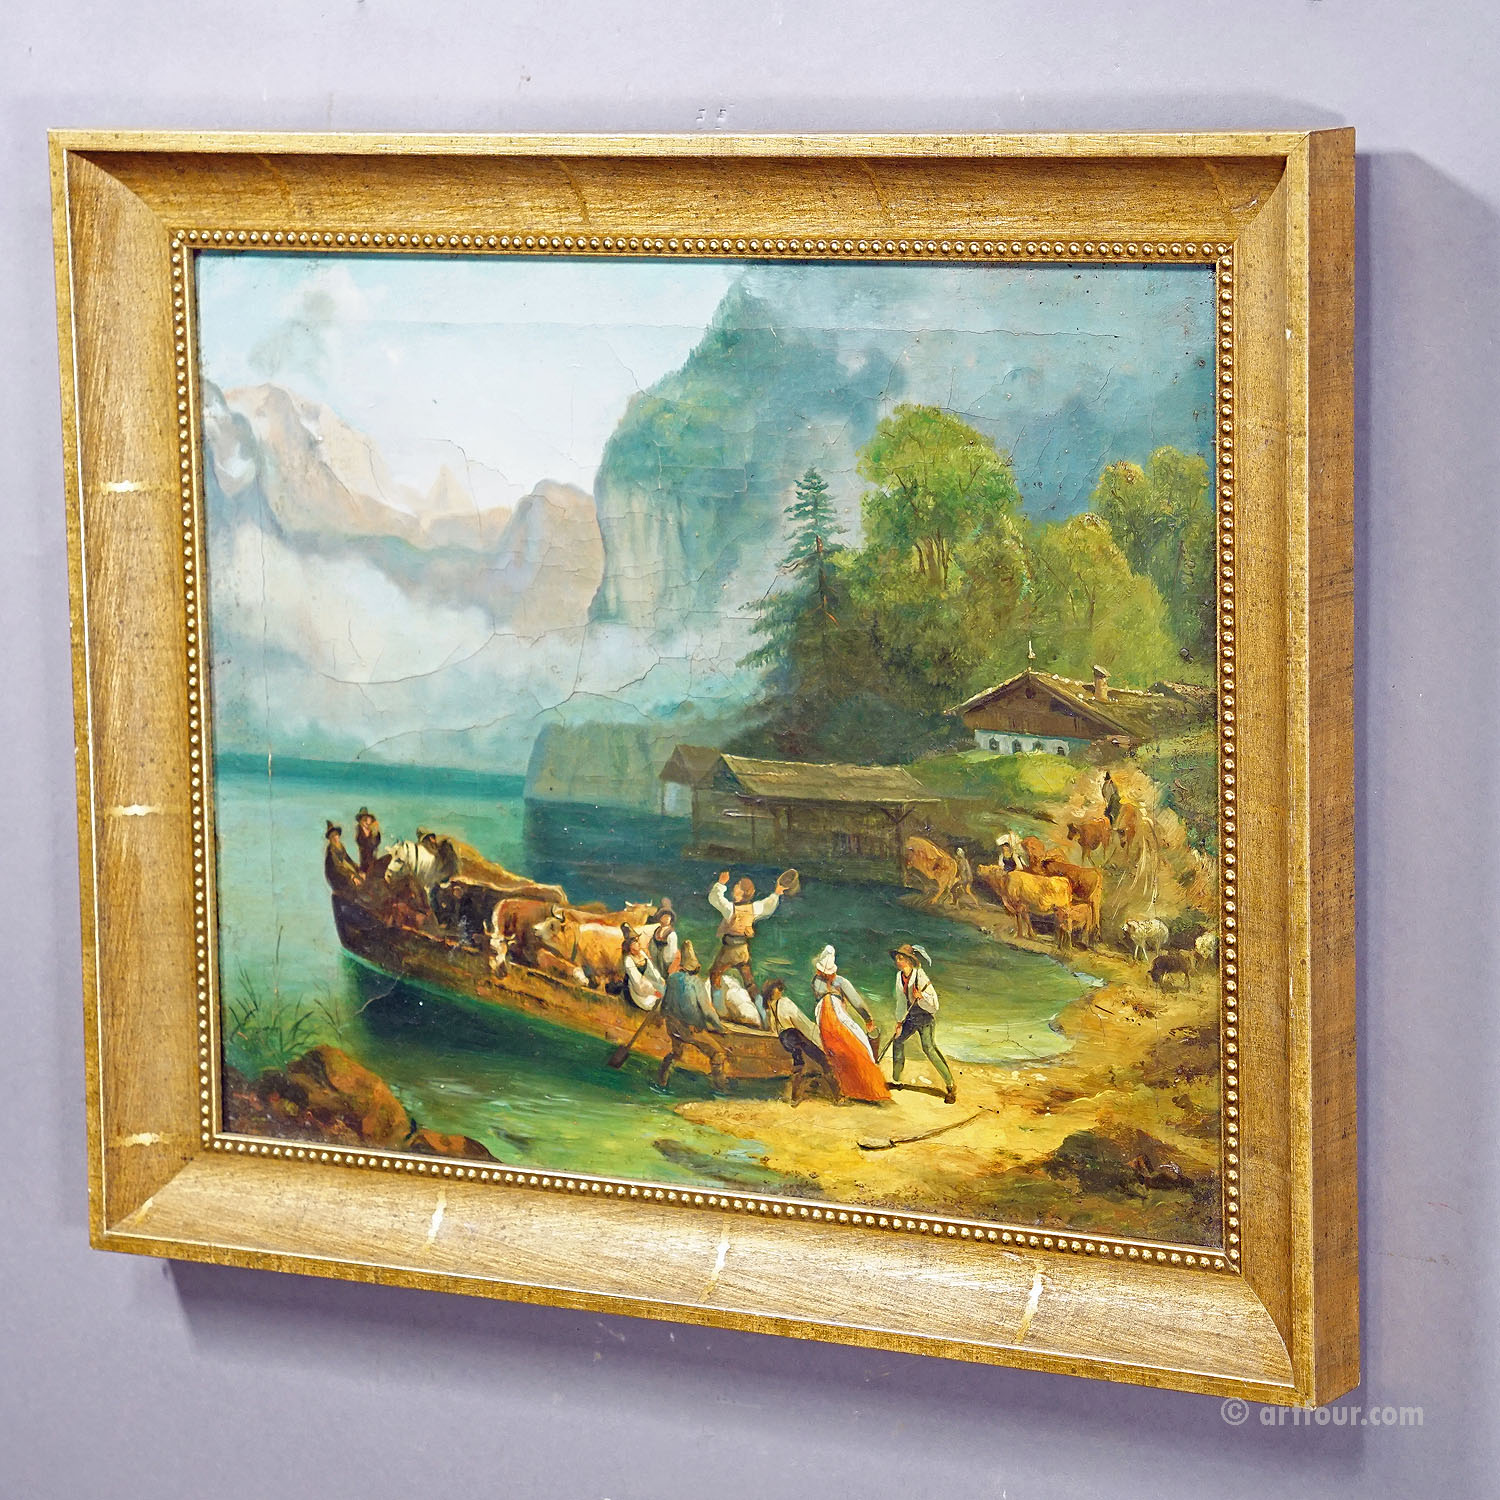 Unknown - Painting Cattle Carriage on an Alpine Lake, Oil on Canvas 19th century